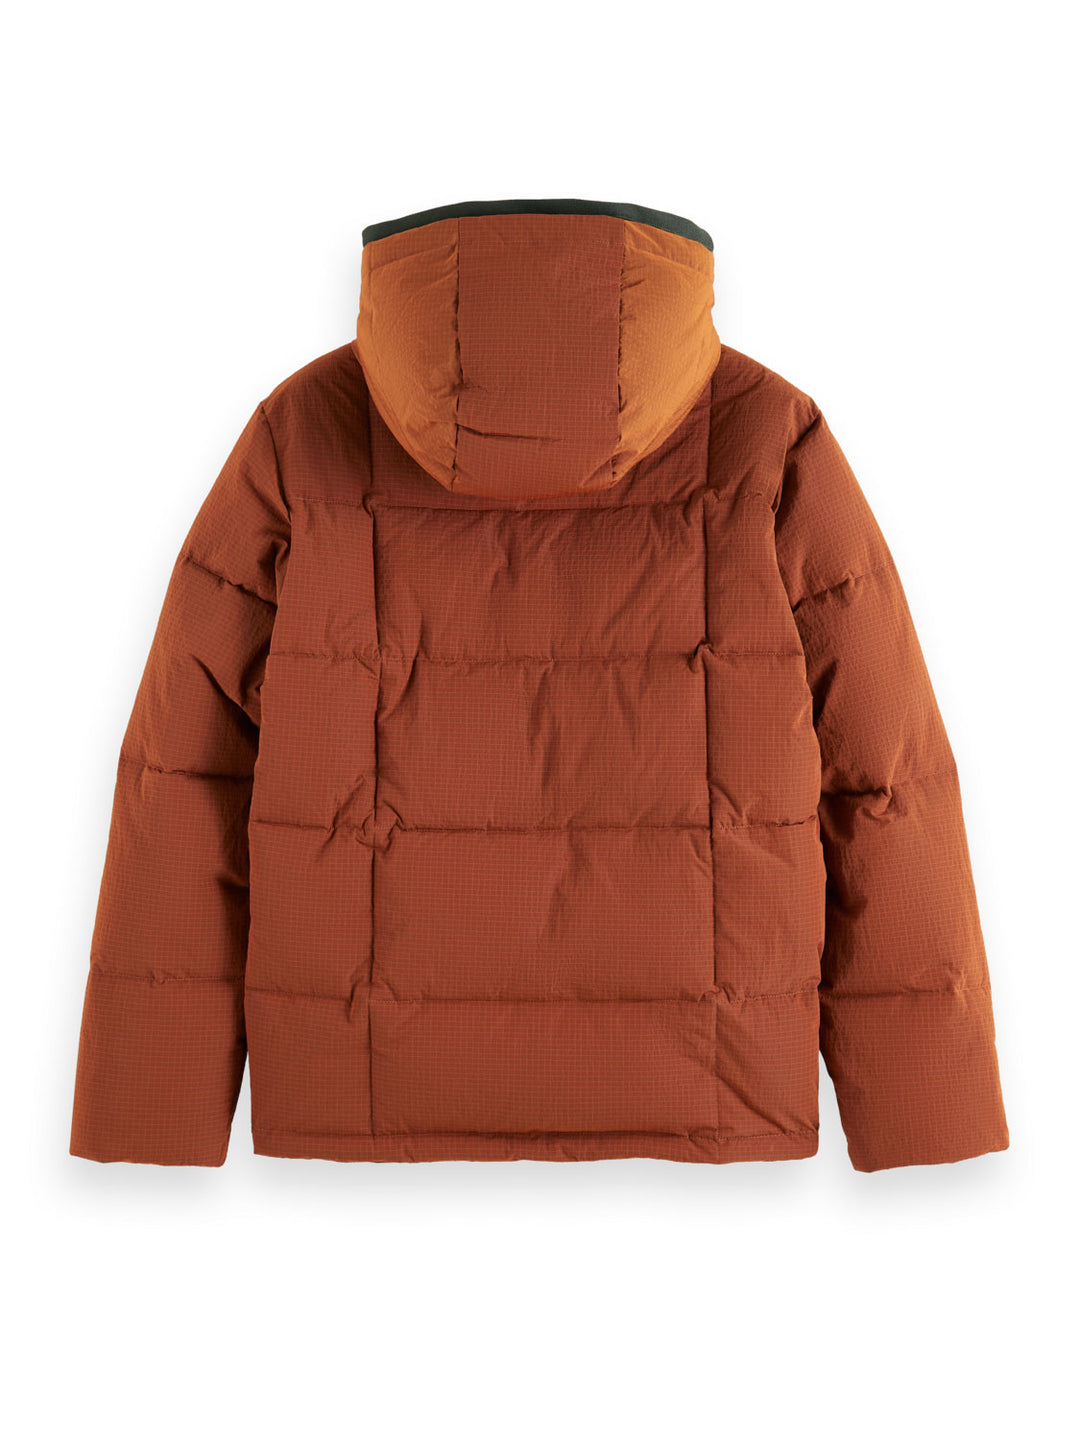 Scotch & Soda - Hooded Puffer Jacket in Deep Toffee | Buster McGee